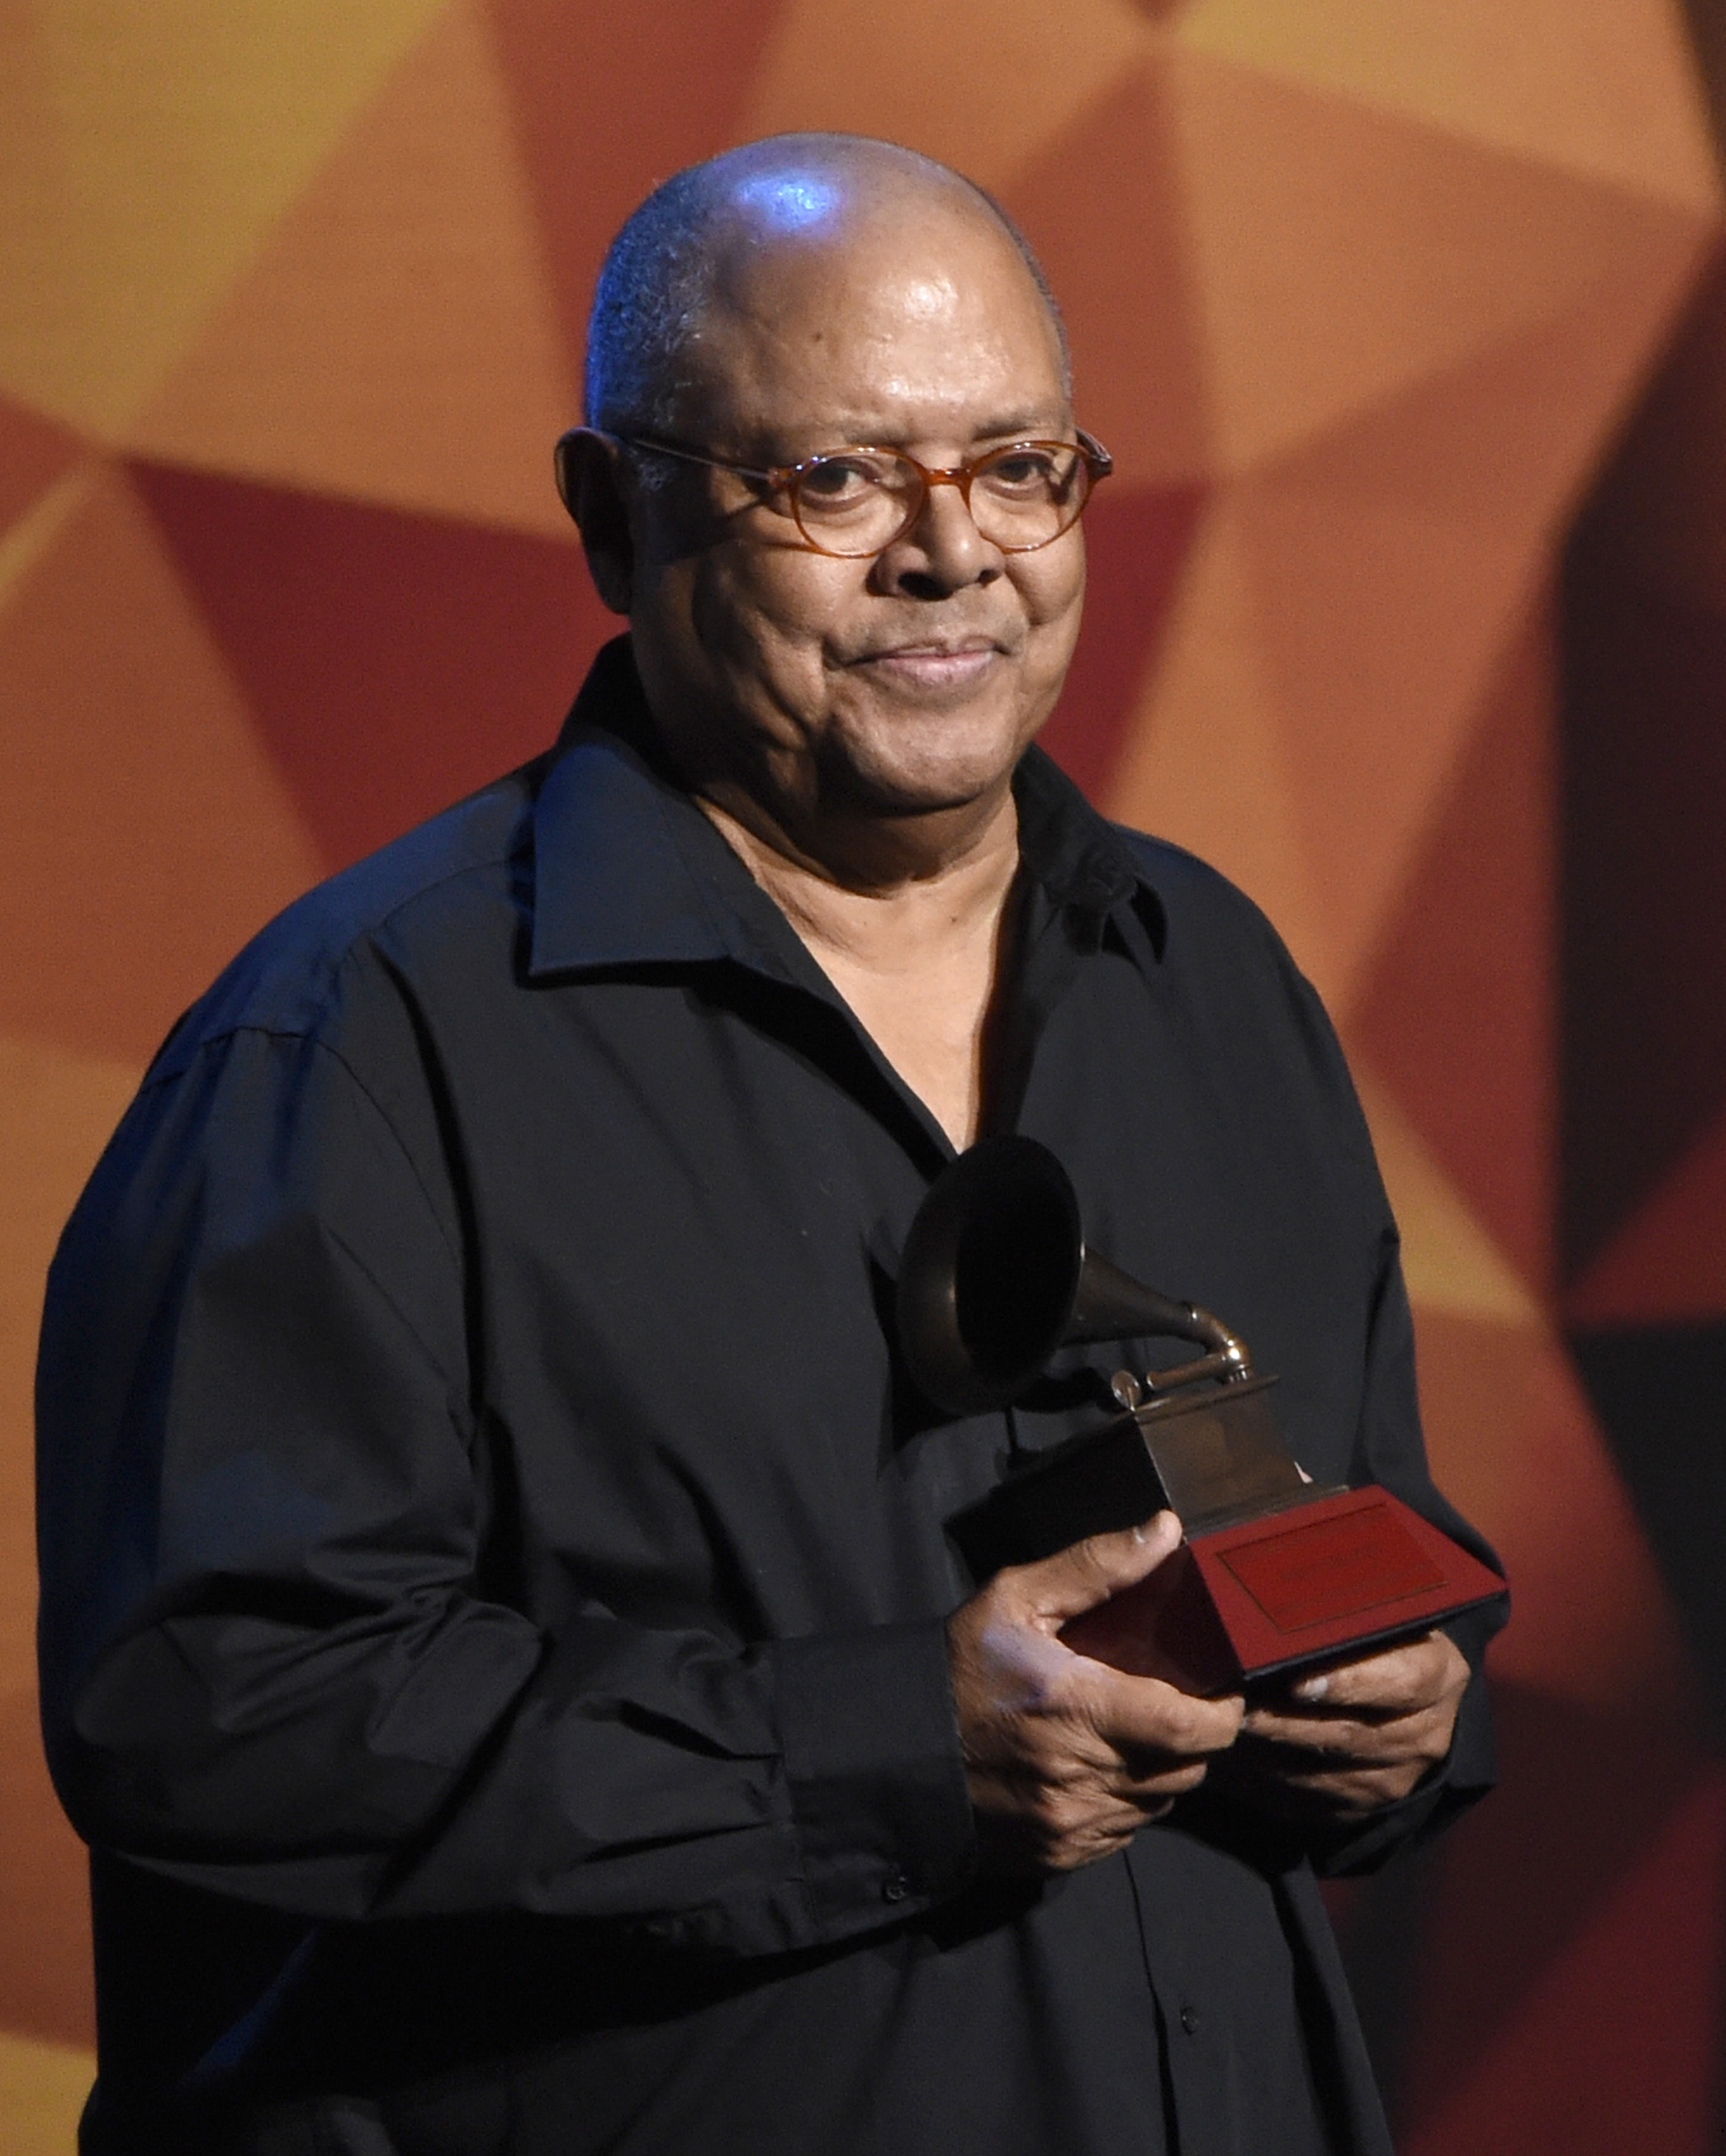 FILE - Pablo Milanes receives the Latin Recording Academy Award for Musical Excellence at the Ka Theater at the MGM Grand Hotel on Nov. 18, 2015, in Las Vegas.  Milanés died in Madrid on November 22, 2022, his office reported.  He was 79 years old.  (Photo Chris Pizzello/Invision/AP, File)